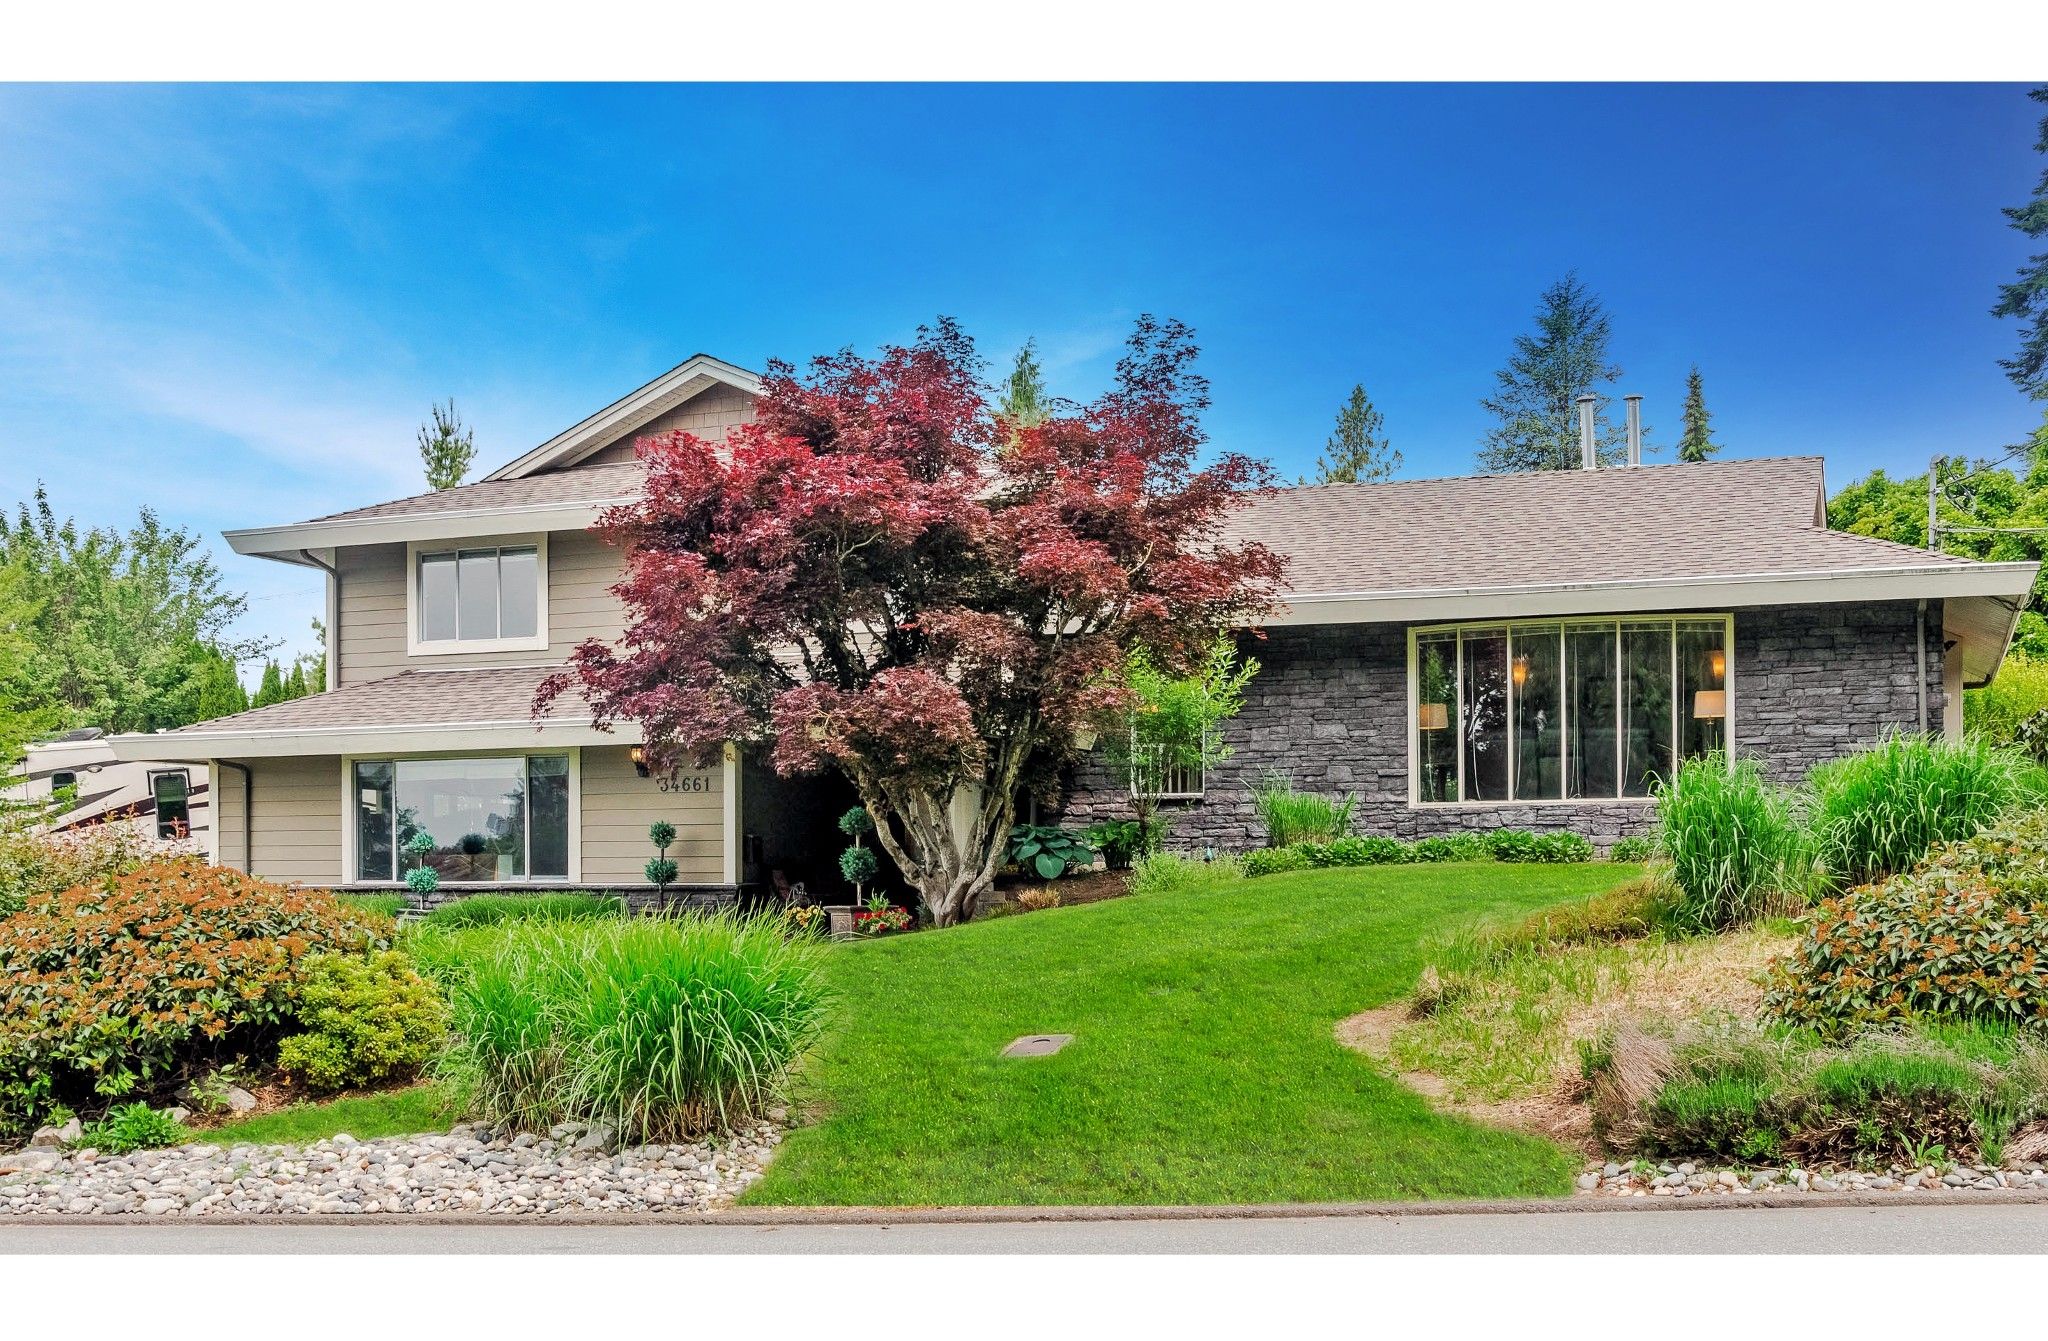 Just sold! Another happy client at 34661 WALKER CRES in Abbotsford